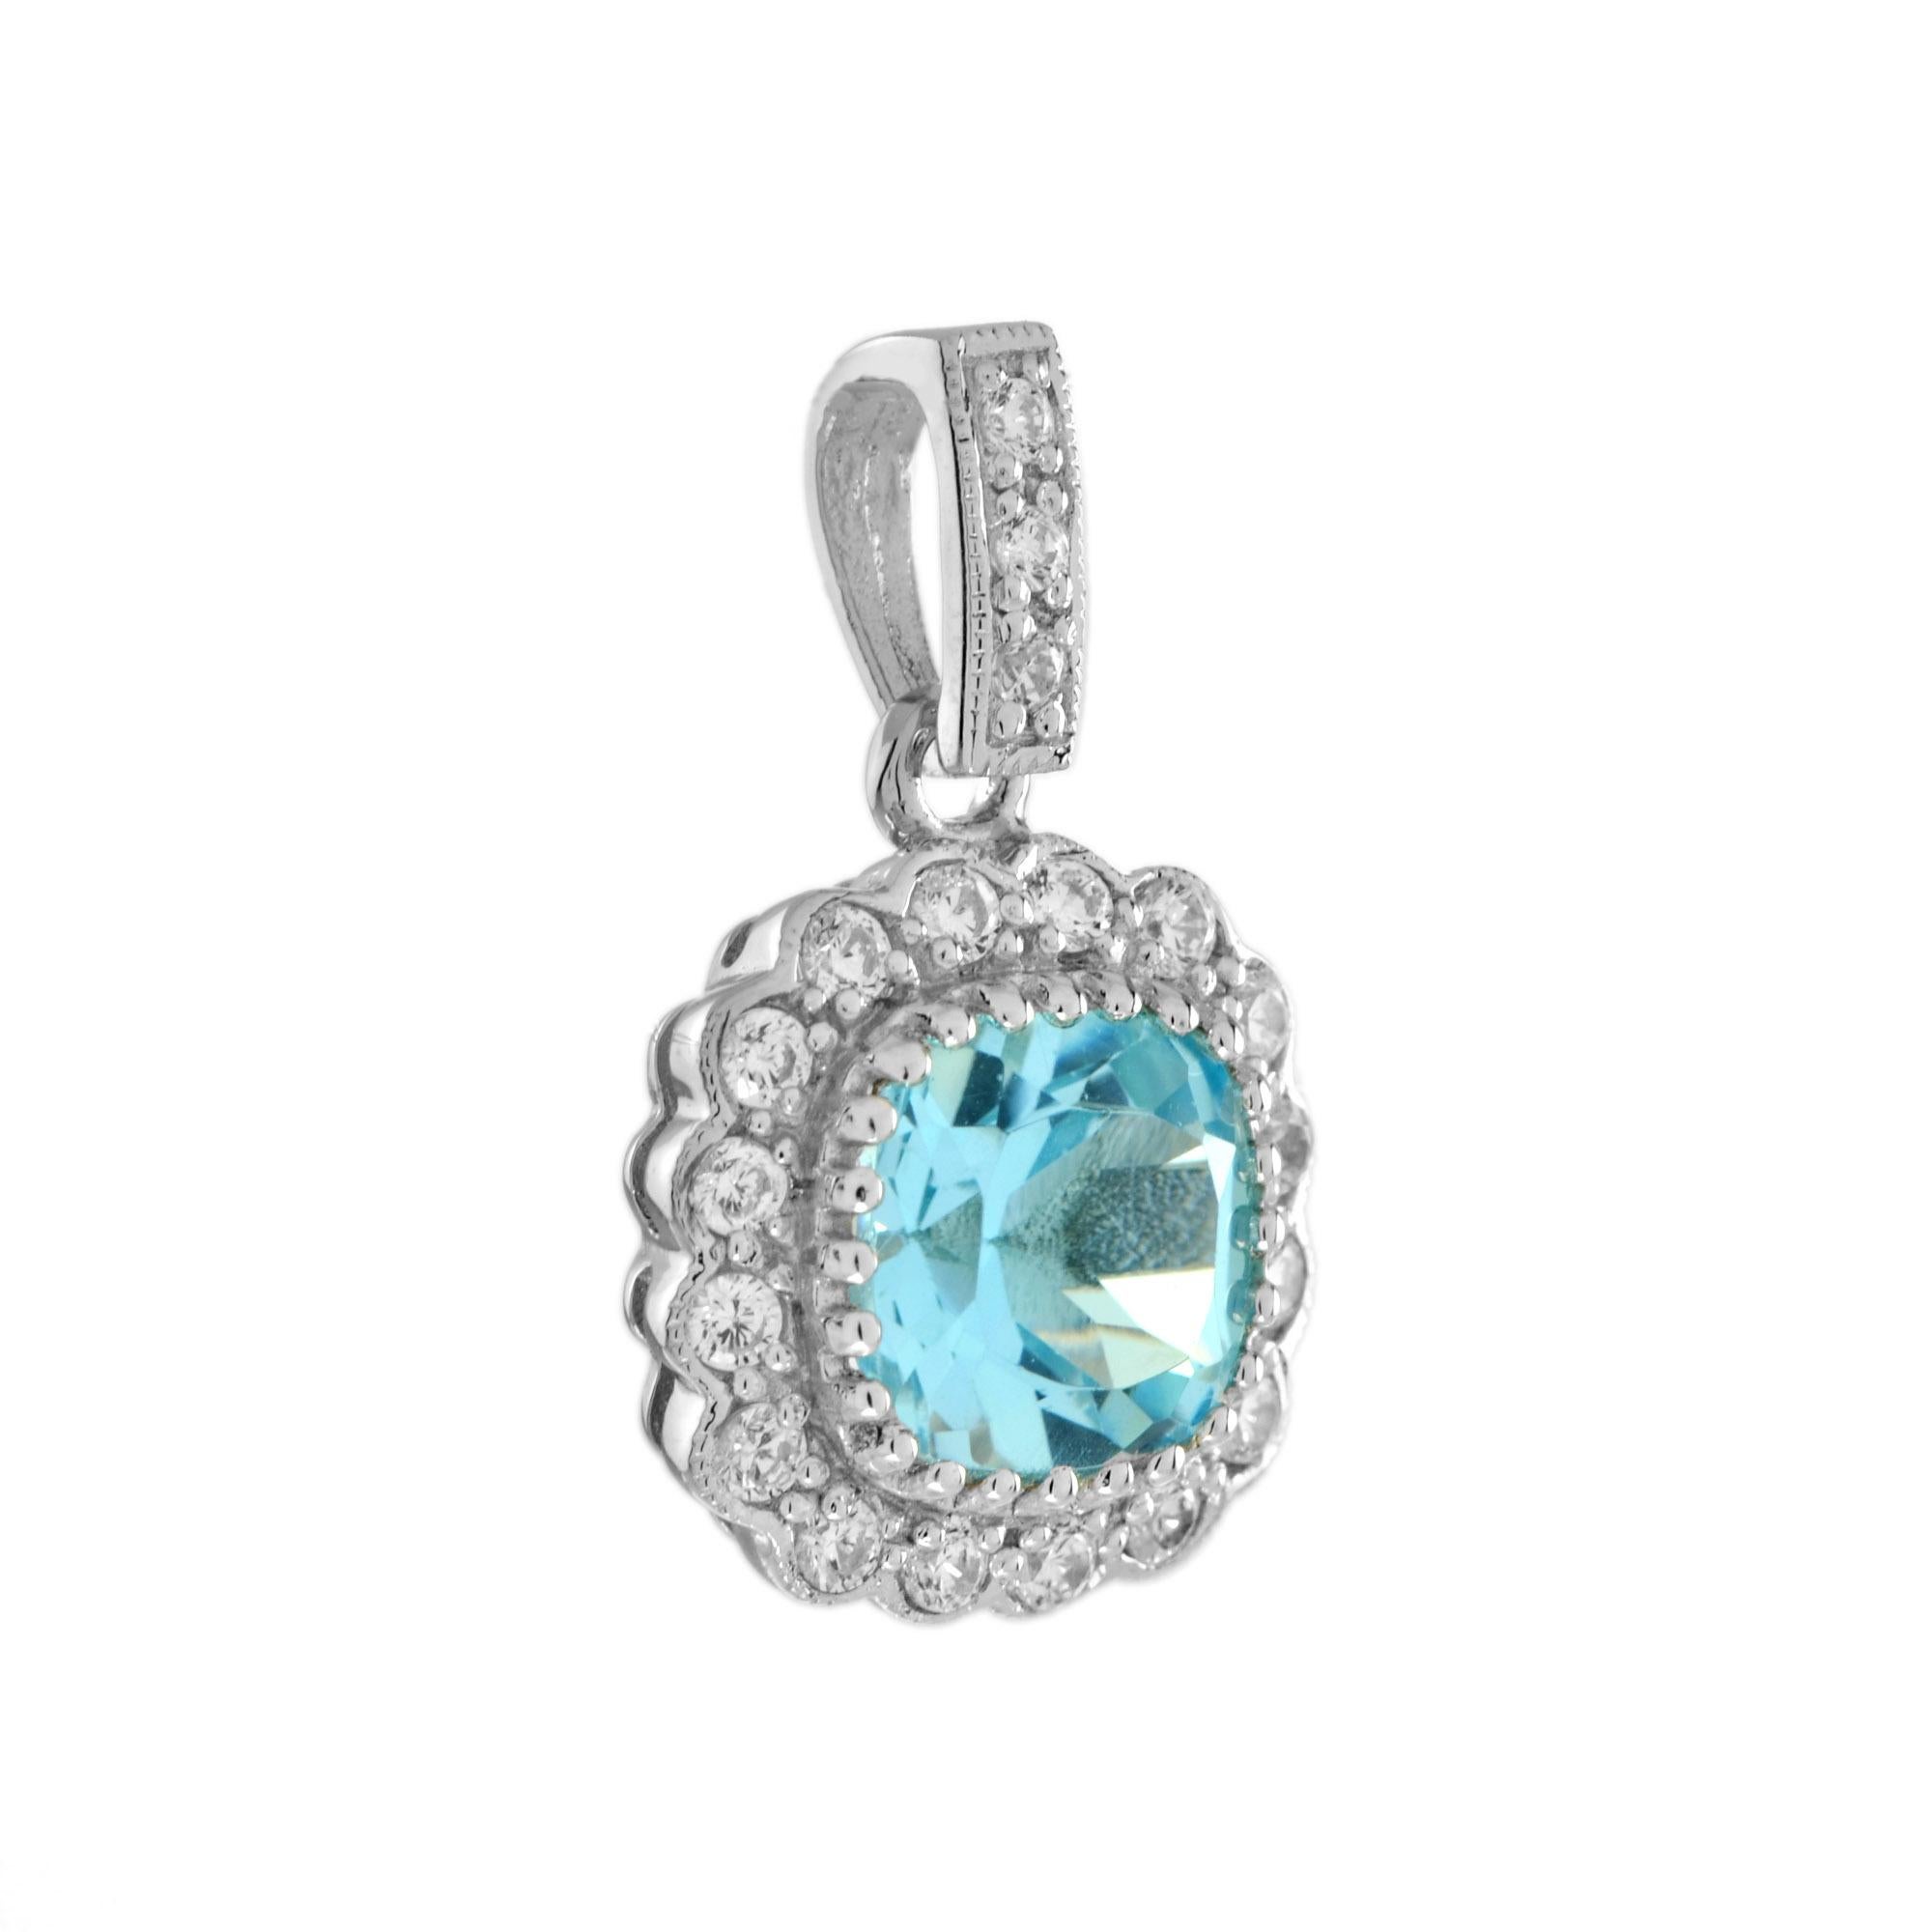 This gorgeous 14k white gold halo pendant feature a total of 1.90 carat cushion-cut blue topaz  surrounded by a halo of diamonds. An effortless upgrade to your accessary wardrobe. Wear it with our same design earrings for your perfect look.